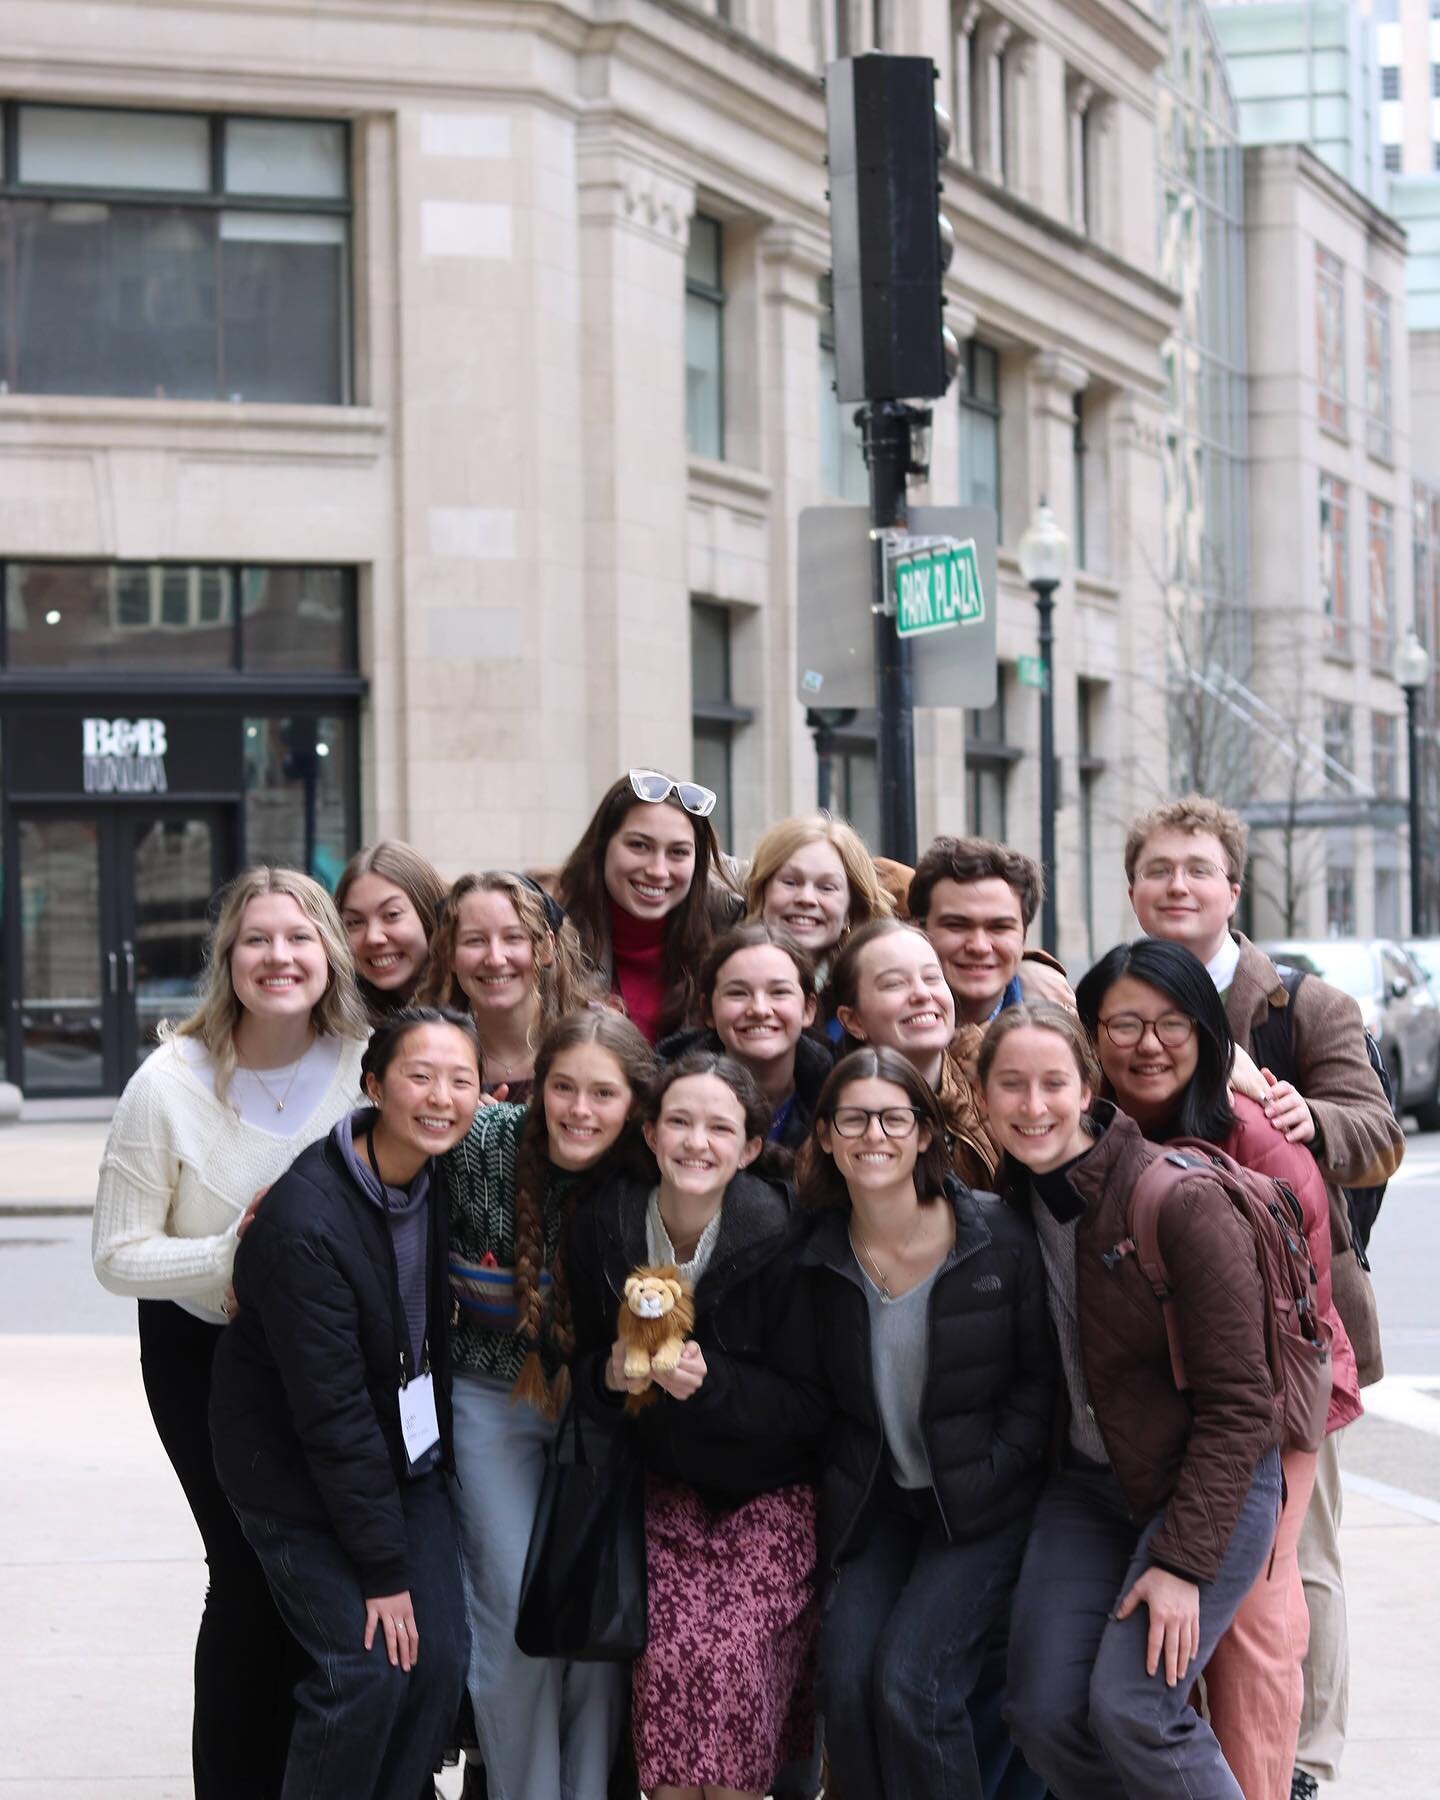 The Bearings team in Boston for Veritas Weekend 2024!

Our team had such an excellent time learning alongside so many wonderful students and speakers. We are back inspired, encouraged, and ready for the next season of our journal!

Thank you @veritas